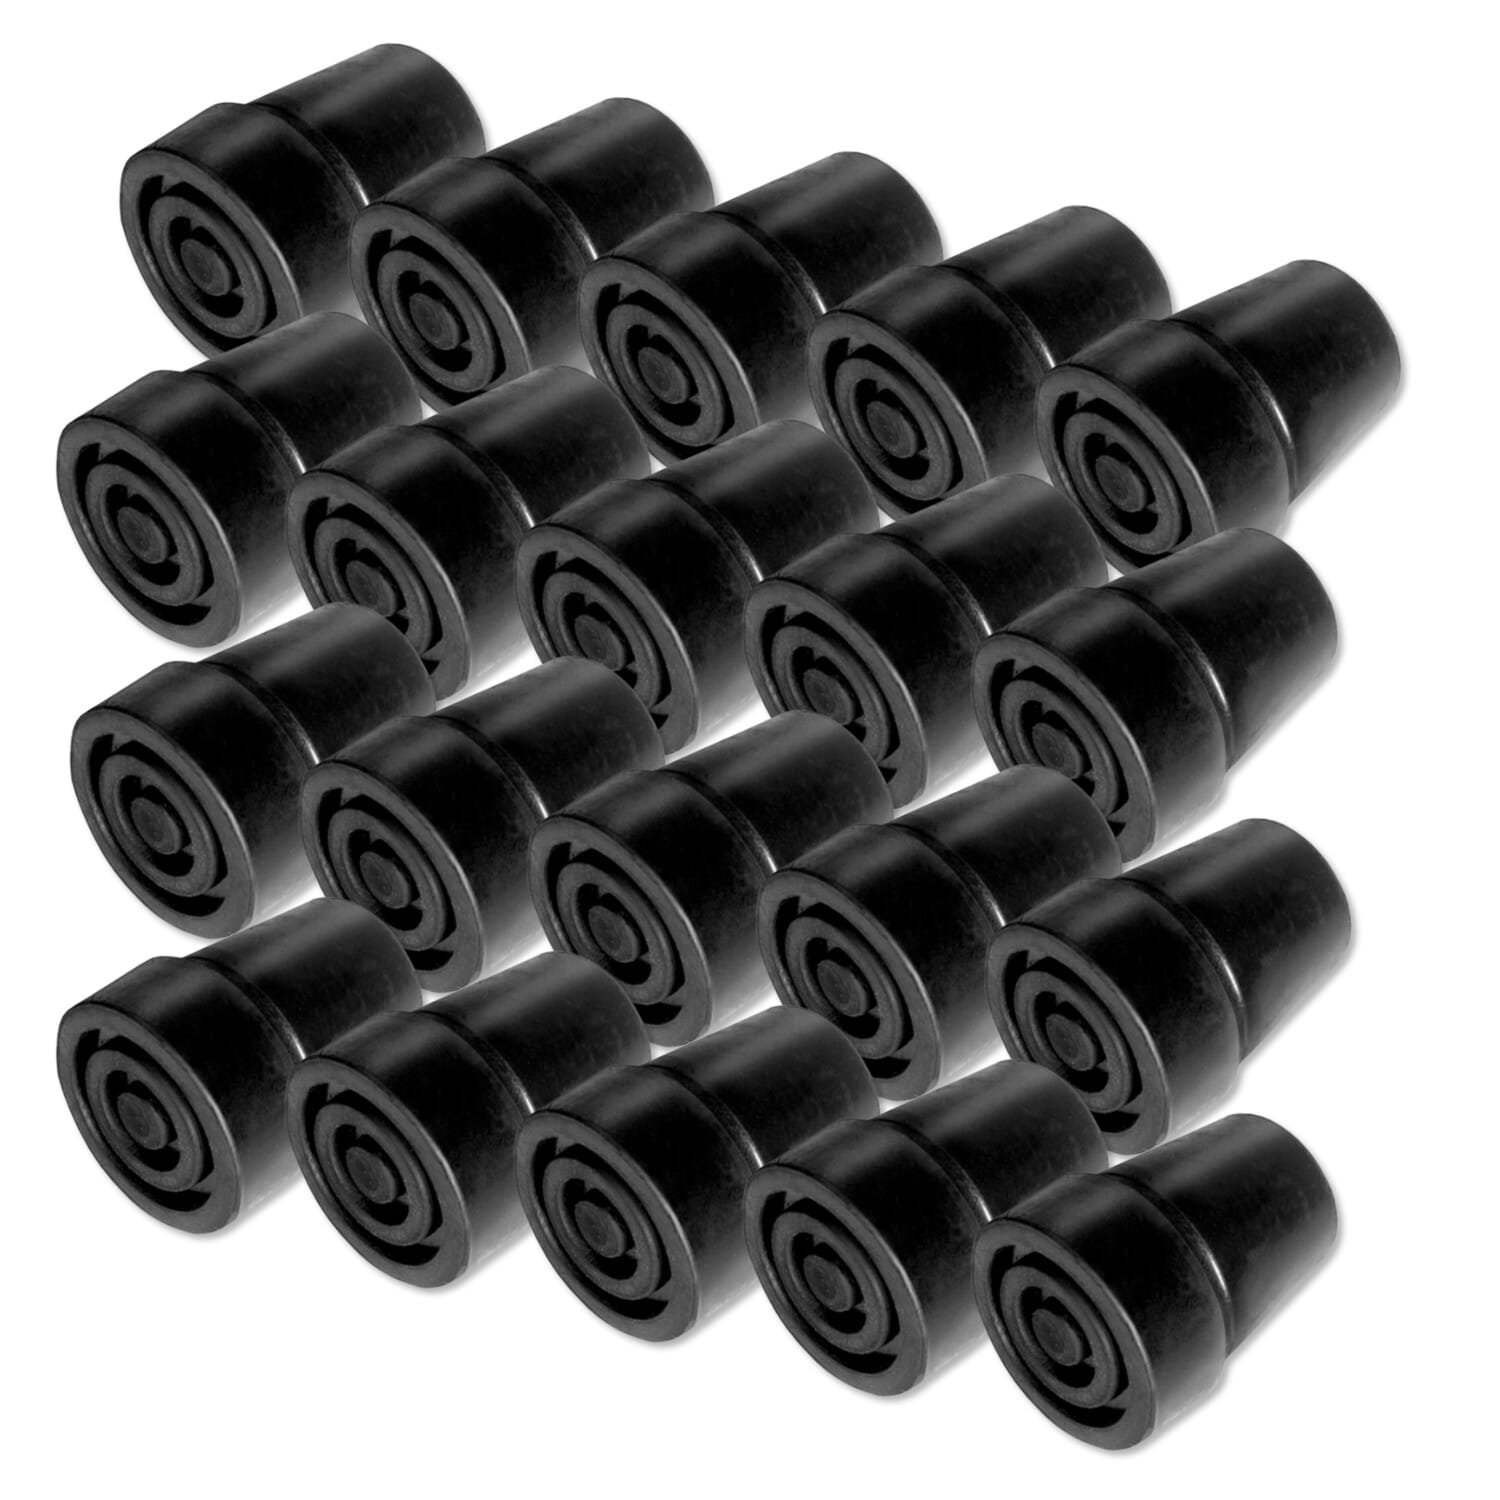 View Rubber Ends For Walking Sticks Rubber Ferrules 19mm black pack of 20 information